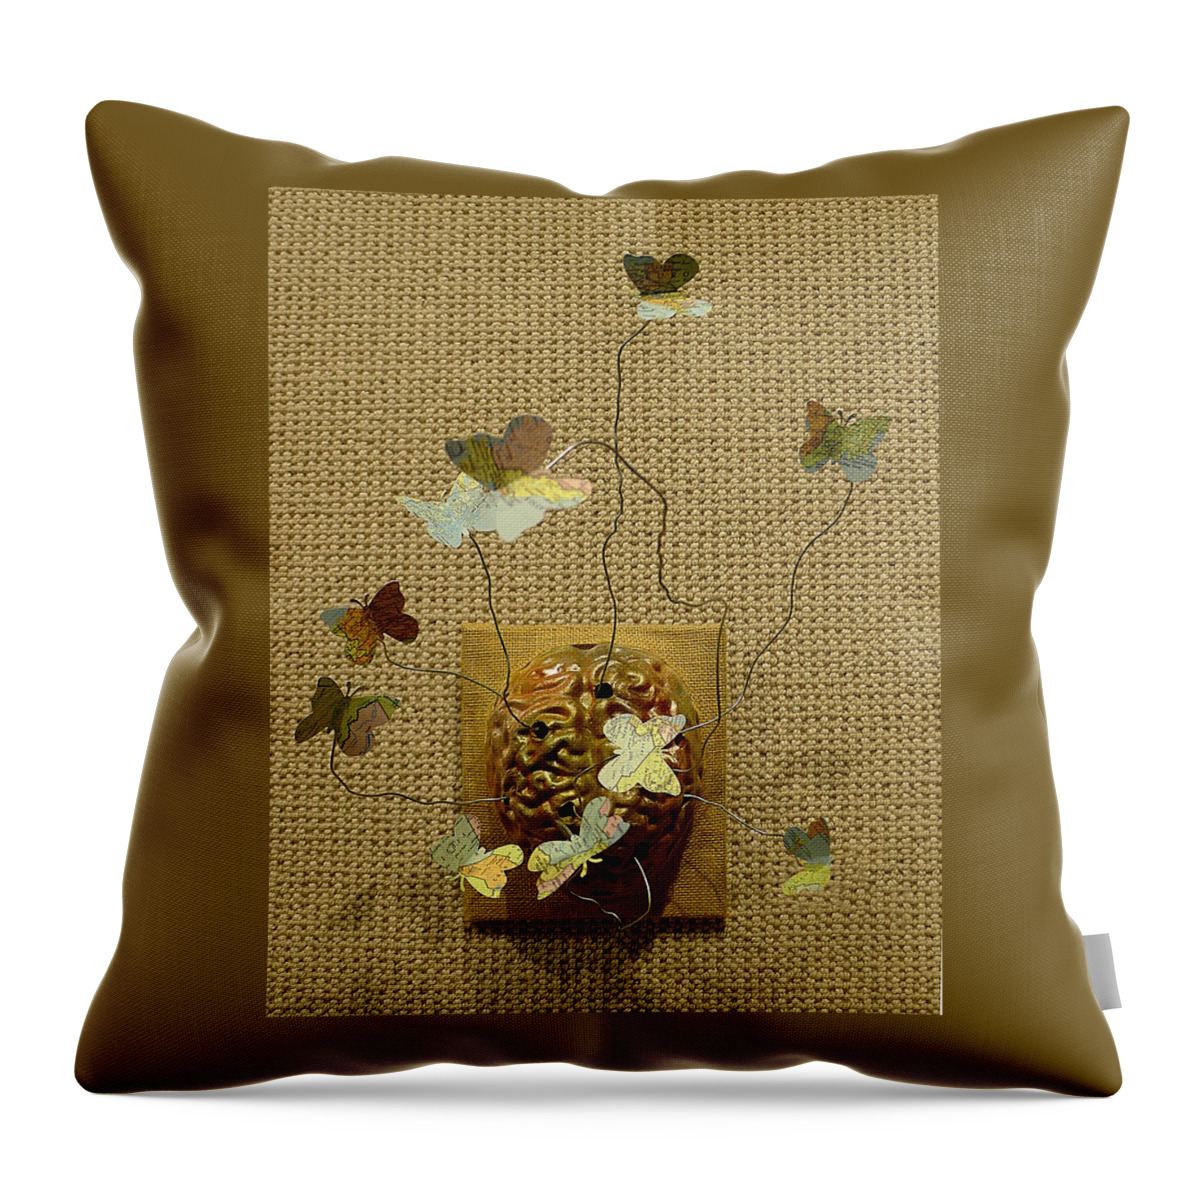 Richard Reeve Throw Pillow featuring the ceramic art Butterfly Mind by Richard Reeve